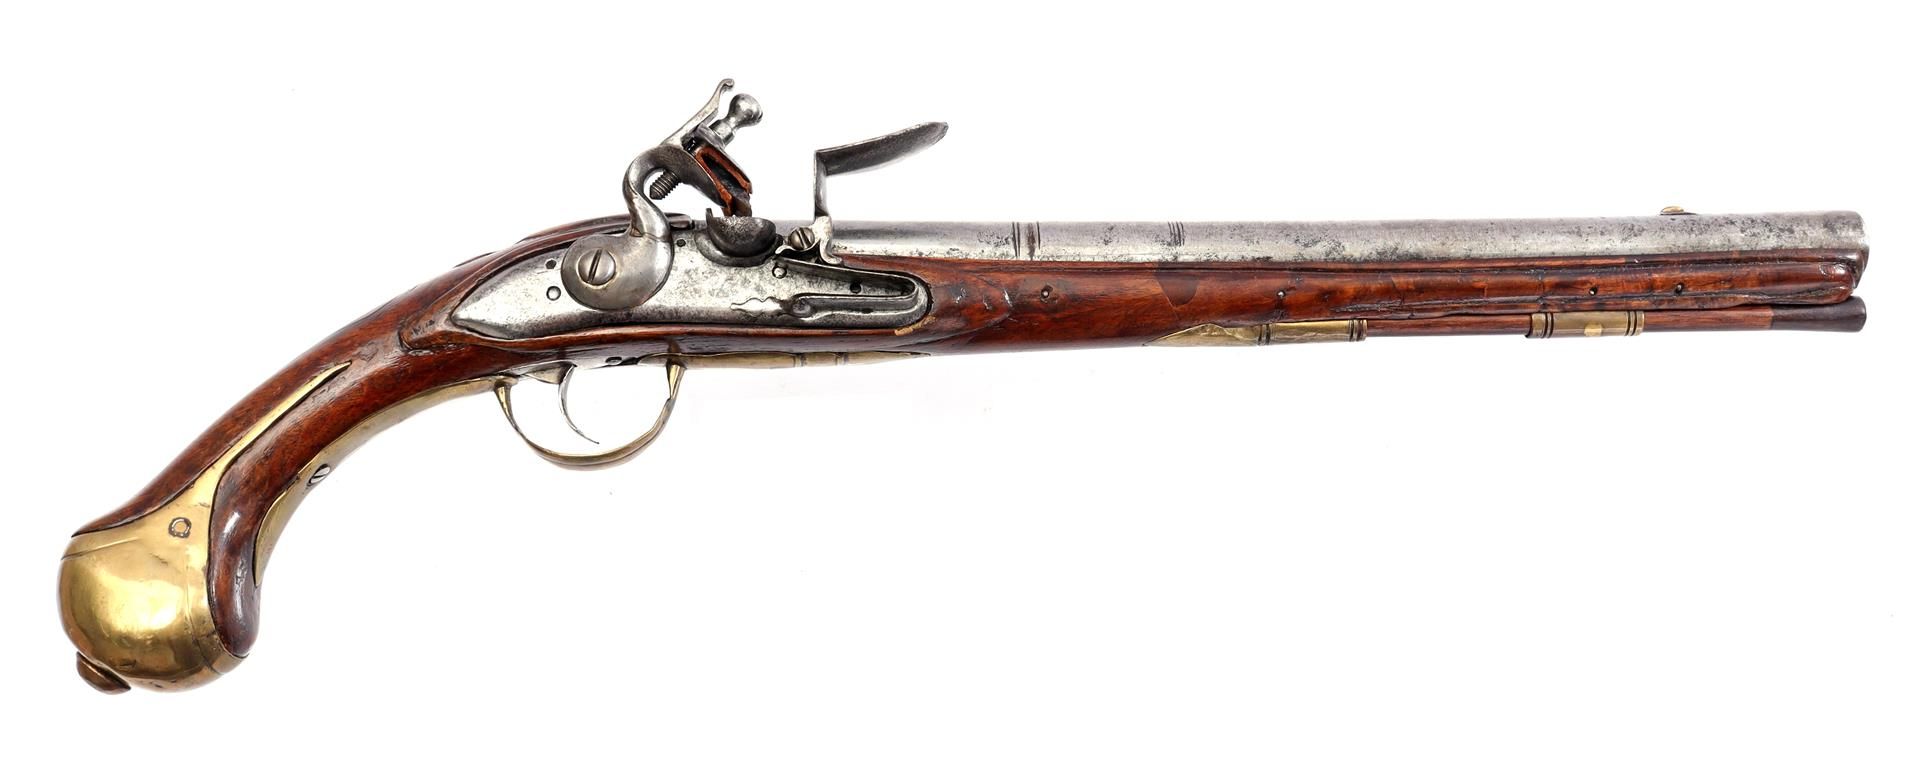 Walnut and metal flint pistol with ramrod and brass fittings